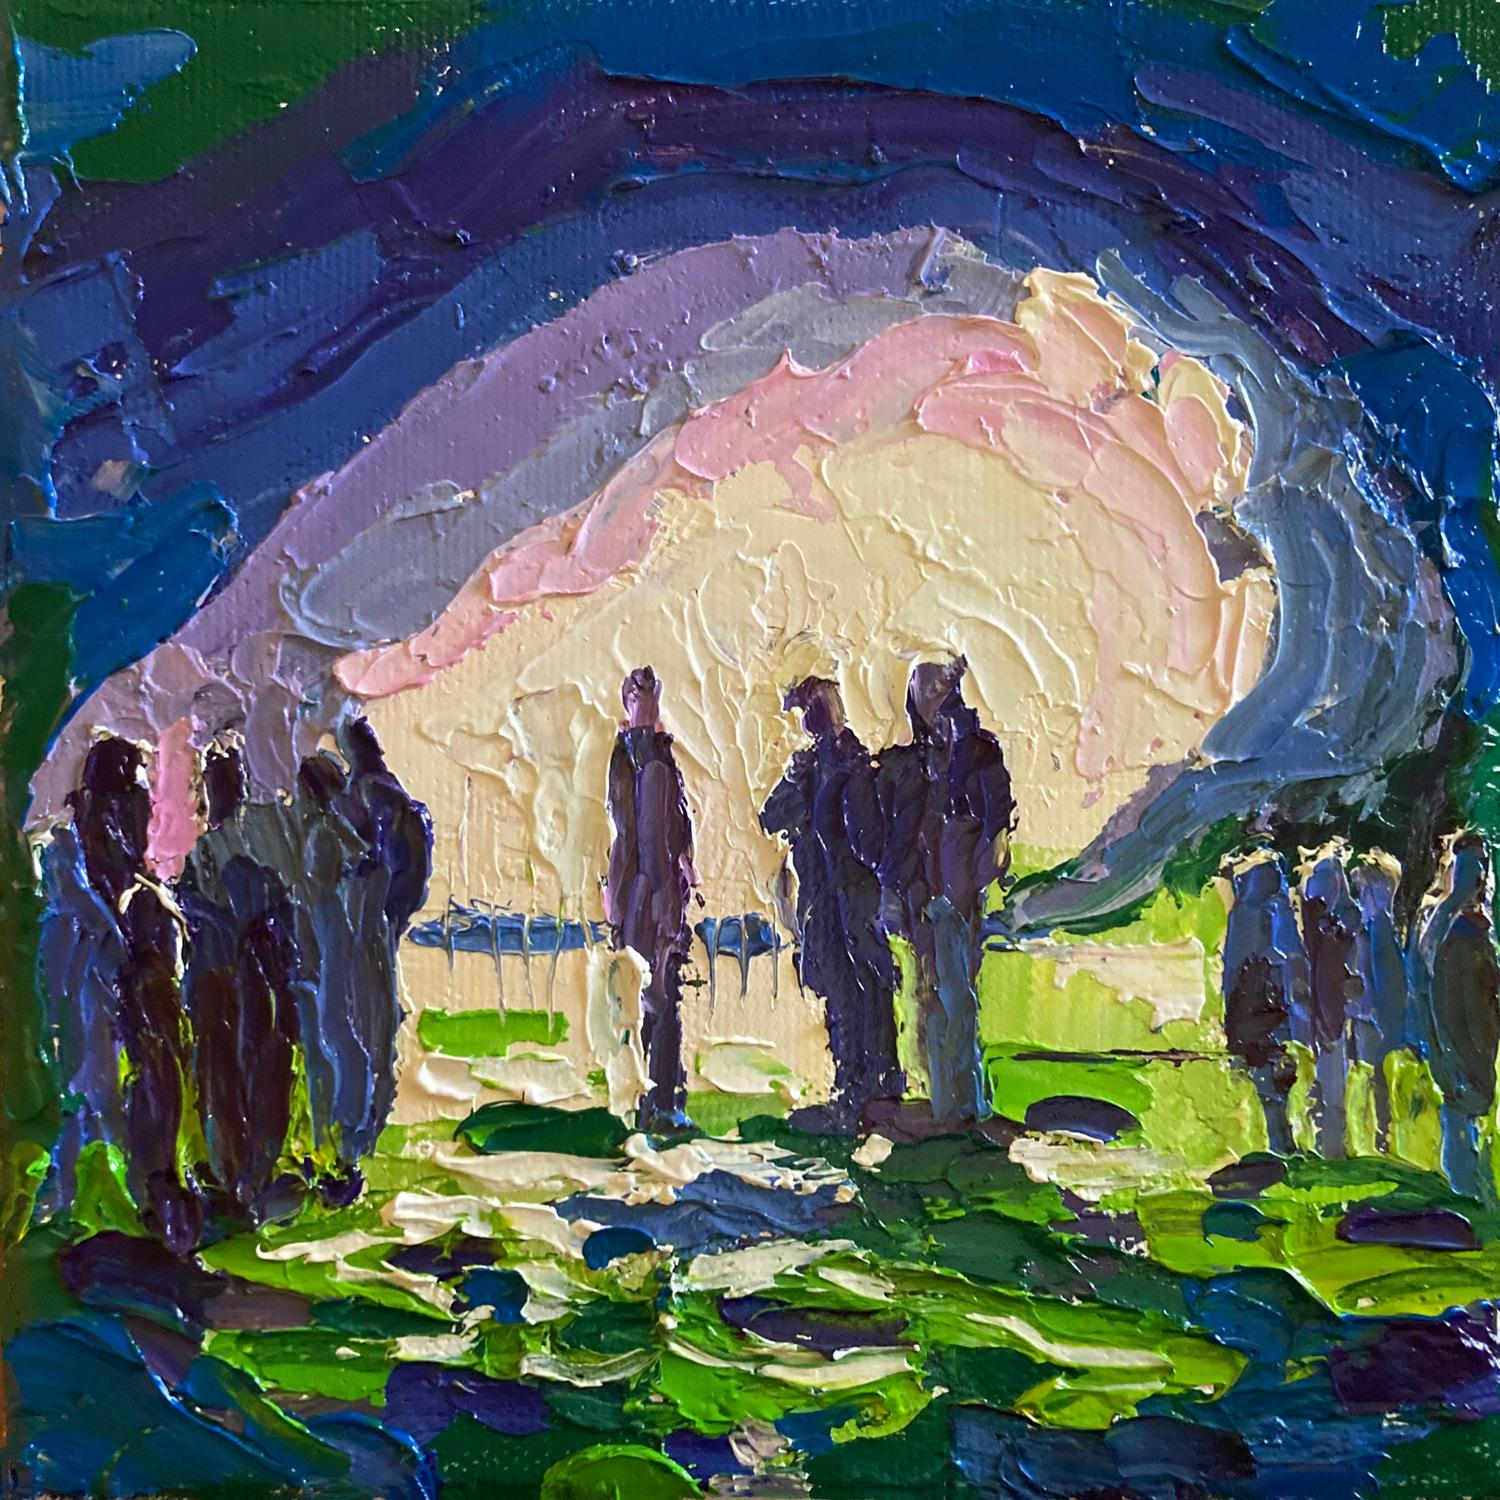 Shadows round the Bonfire by Eleanor Woolley [November 2022]
original and hand signed by the artist 
Oil Paint on Canvas
Image size: H:15 cm x W:15 cm
Complete Size of Unframed Work: H:15 cm x W:15 cm x D:2cm
Sold Unframed
Please note that insitu